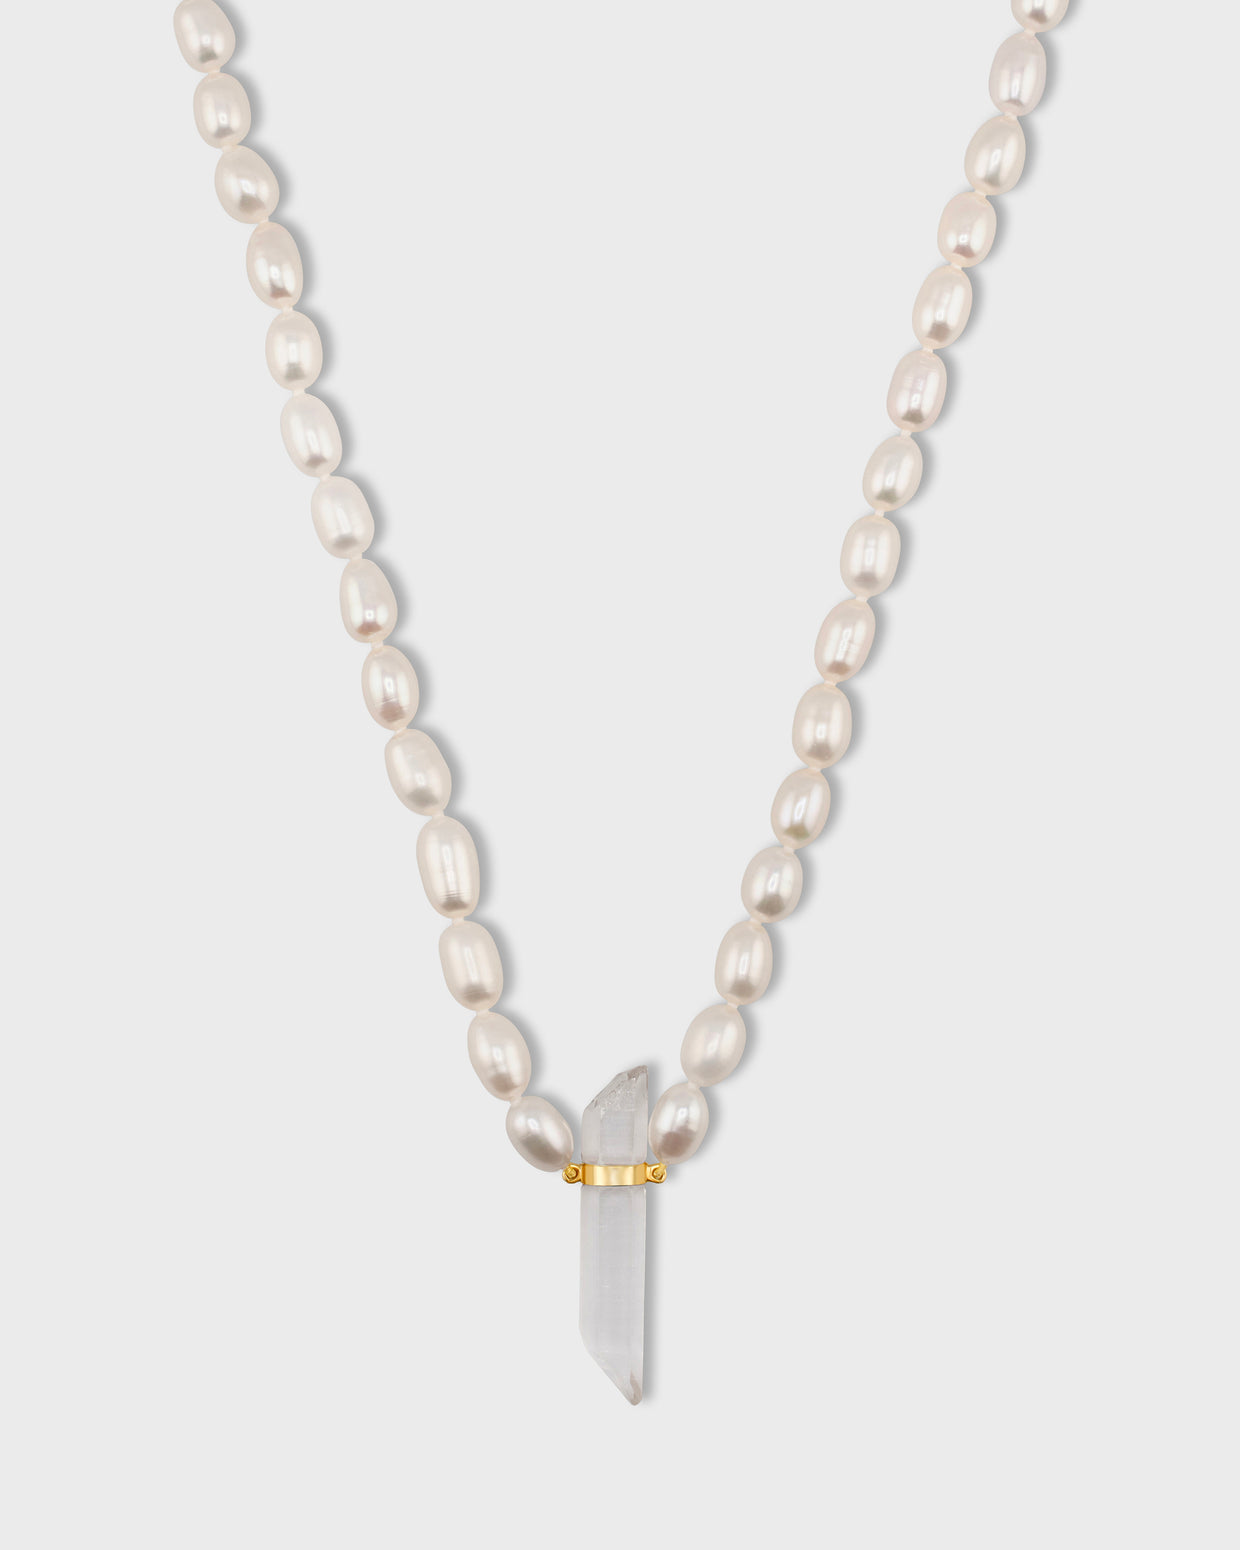 Ocean Vertical Pearl with Crystal Quartz Charm Necklace